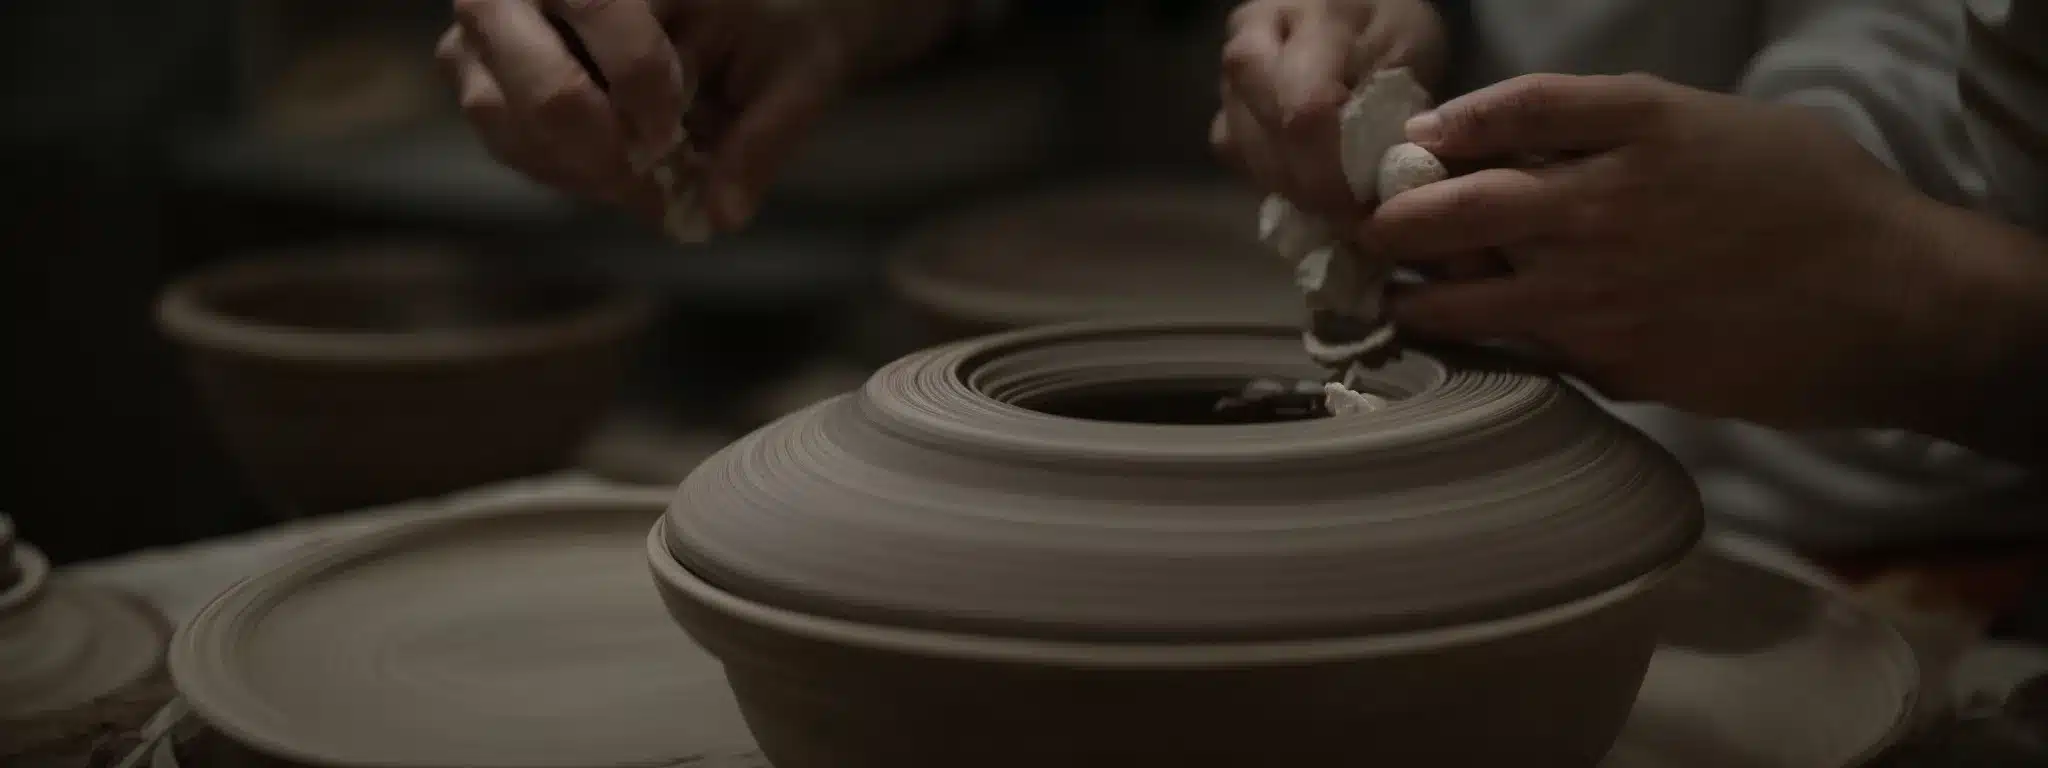 A Person At A Potter'S Wheel Shapes A Lump Of Clay, Focused And Alone In The Creative Process.